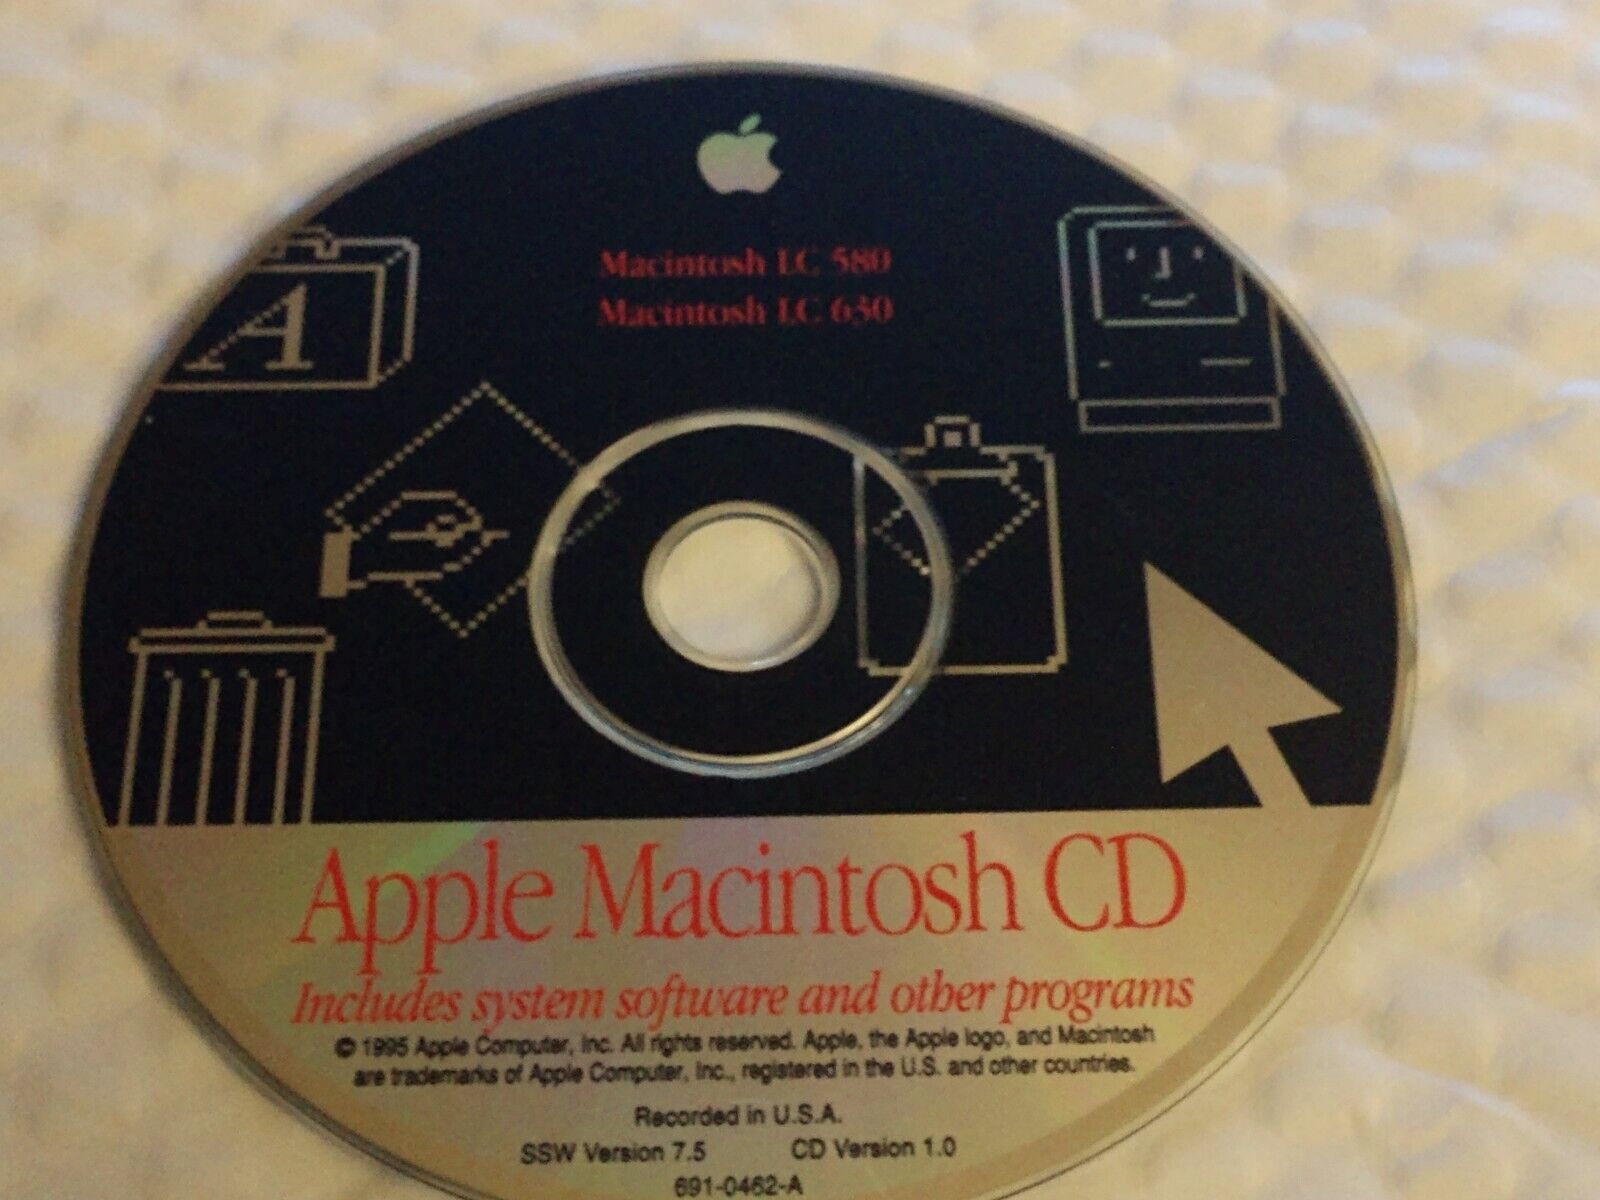 Vintage 1995 Macintosh System Software Install CD Disc 691-0462-A LC 580 LC 630